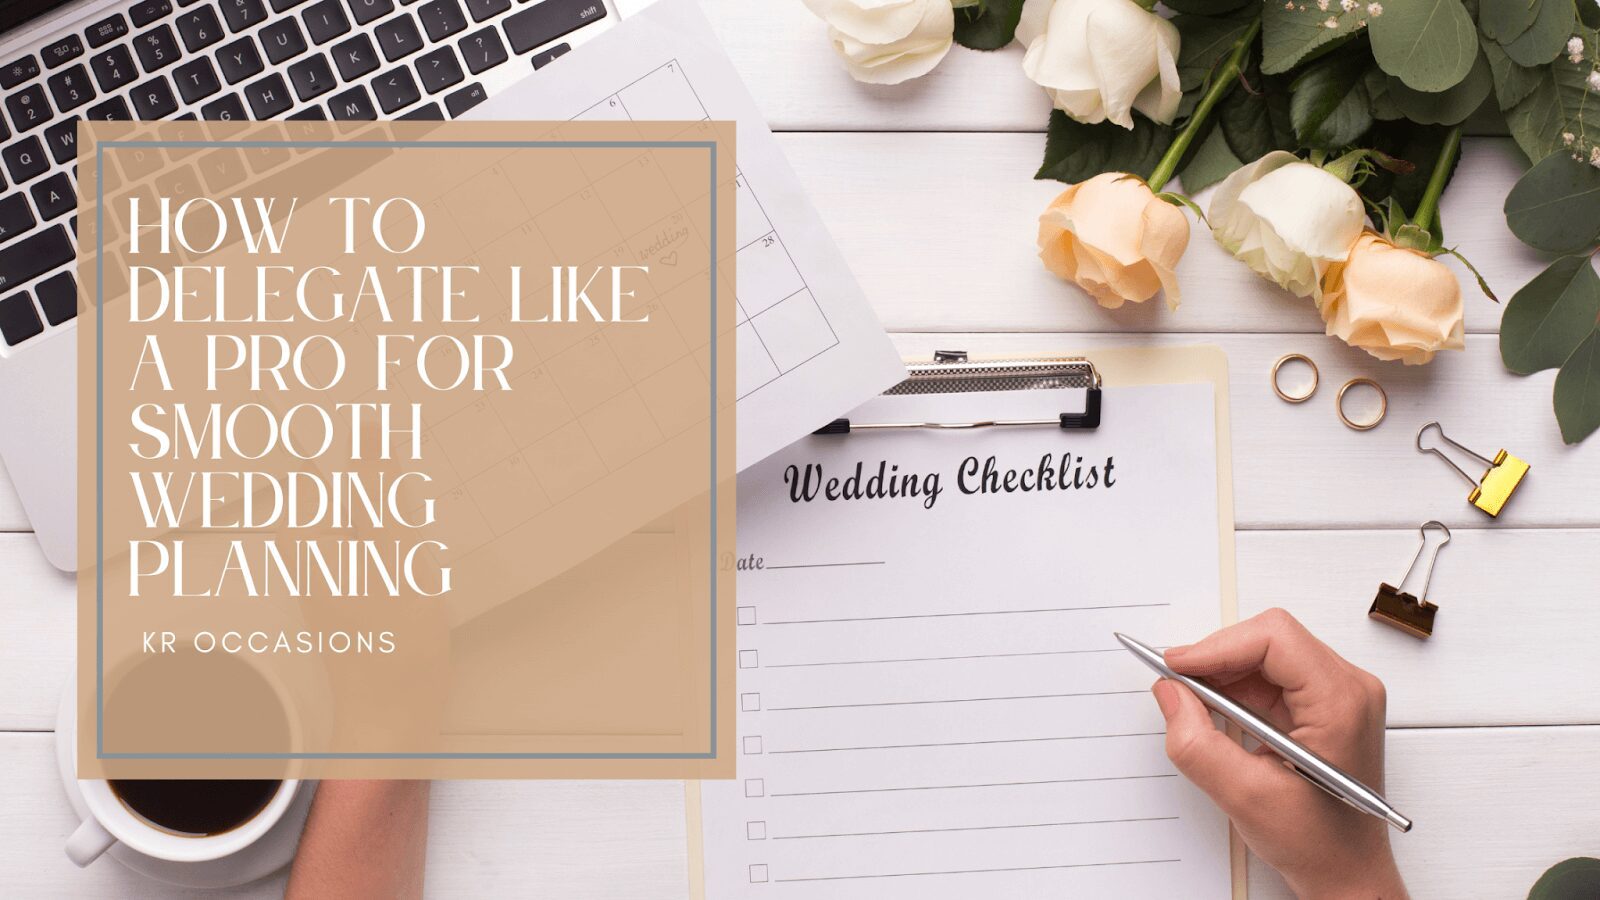 How to Delegate Like a Pro for Smooth Wedding Planning